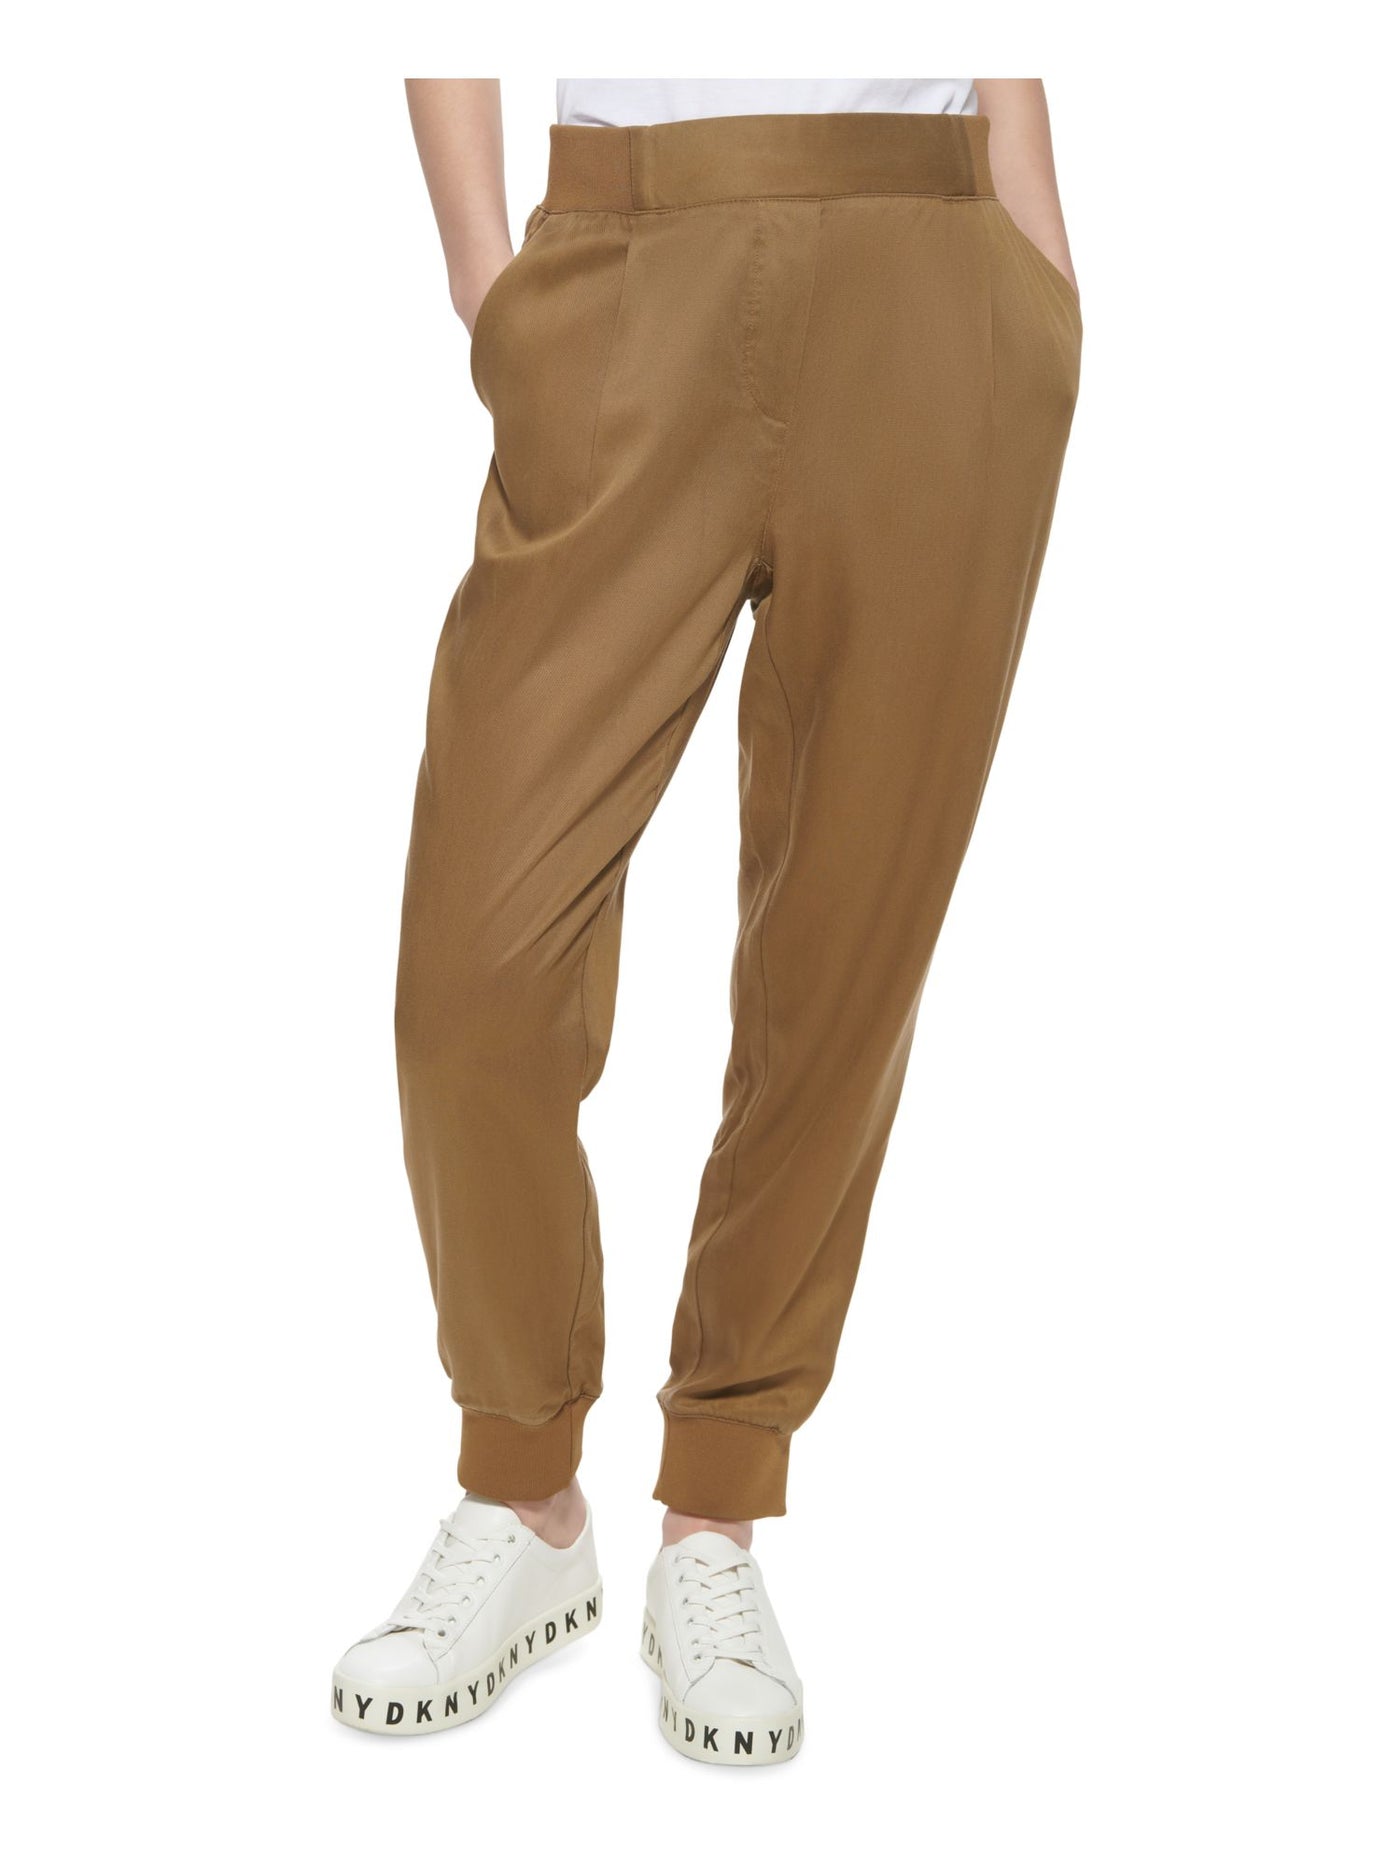 DKNY Womens Brown Stretch Pocketed Tie Mid Rise Tapered Joggers Pants XL